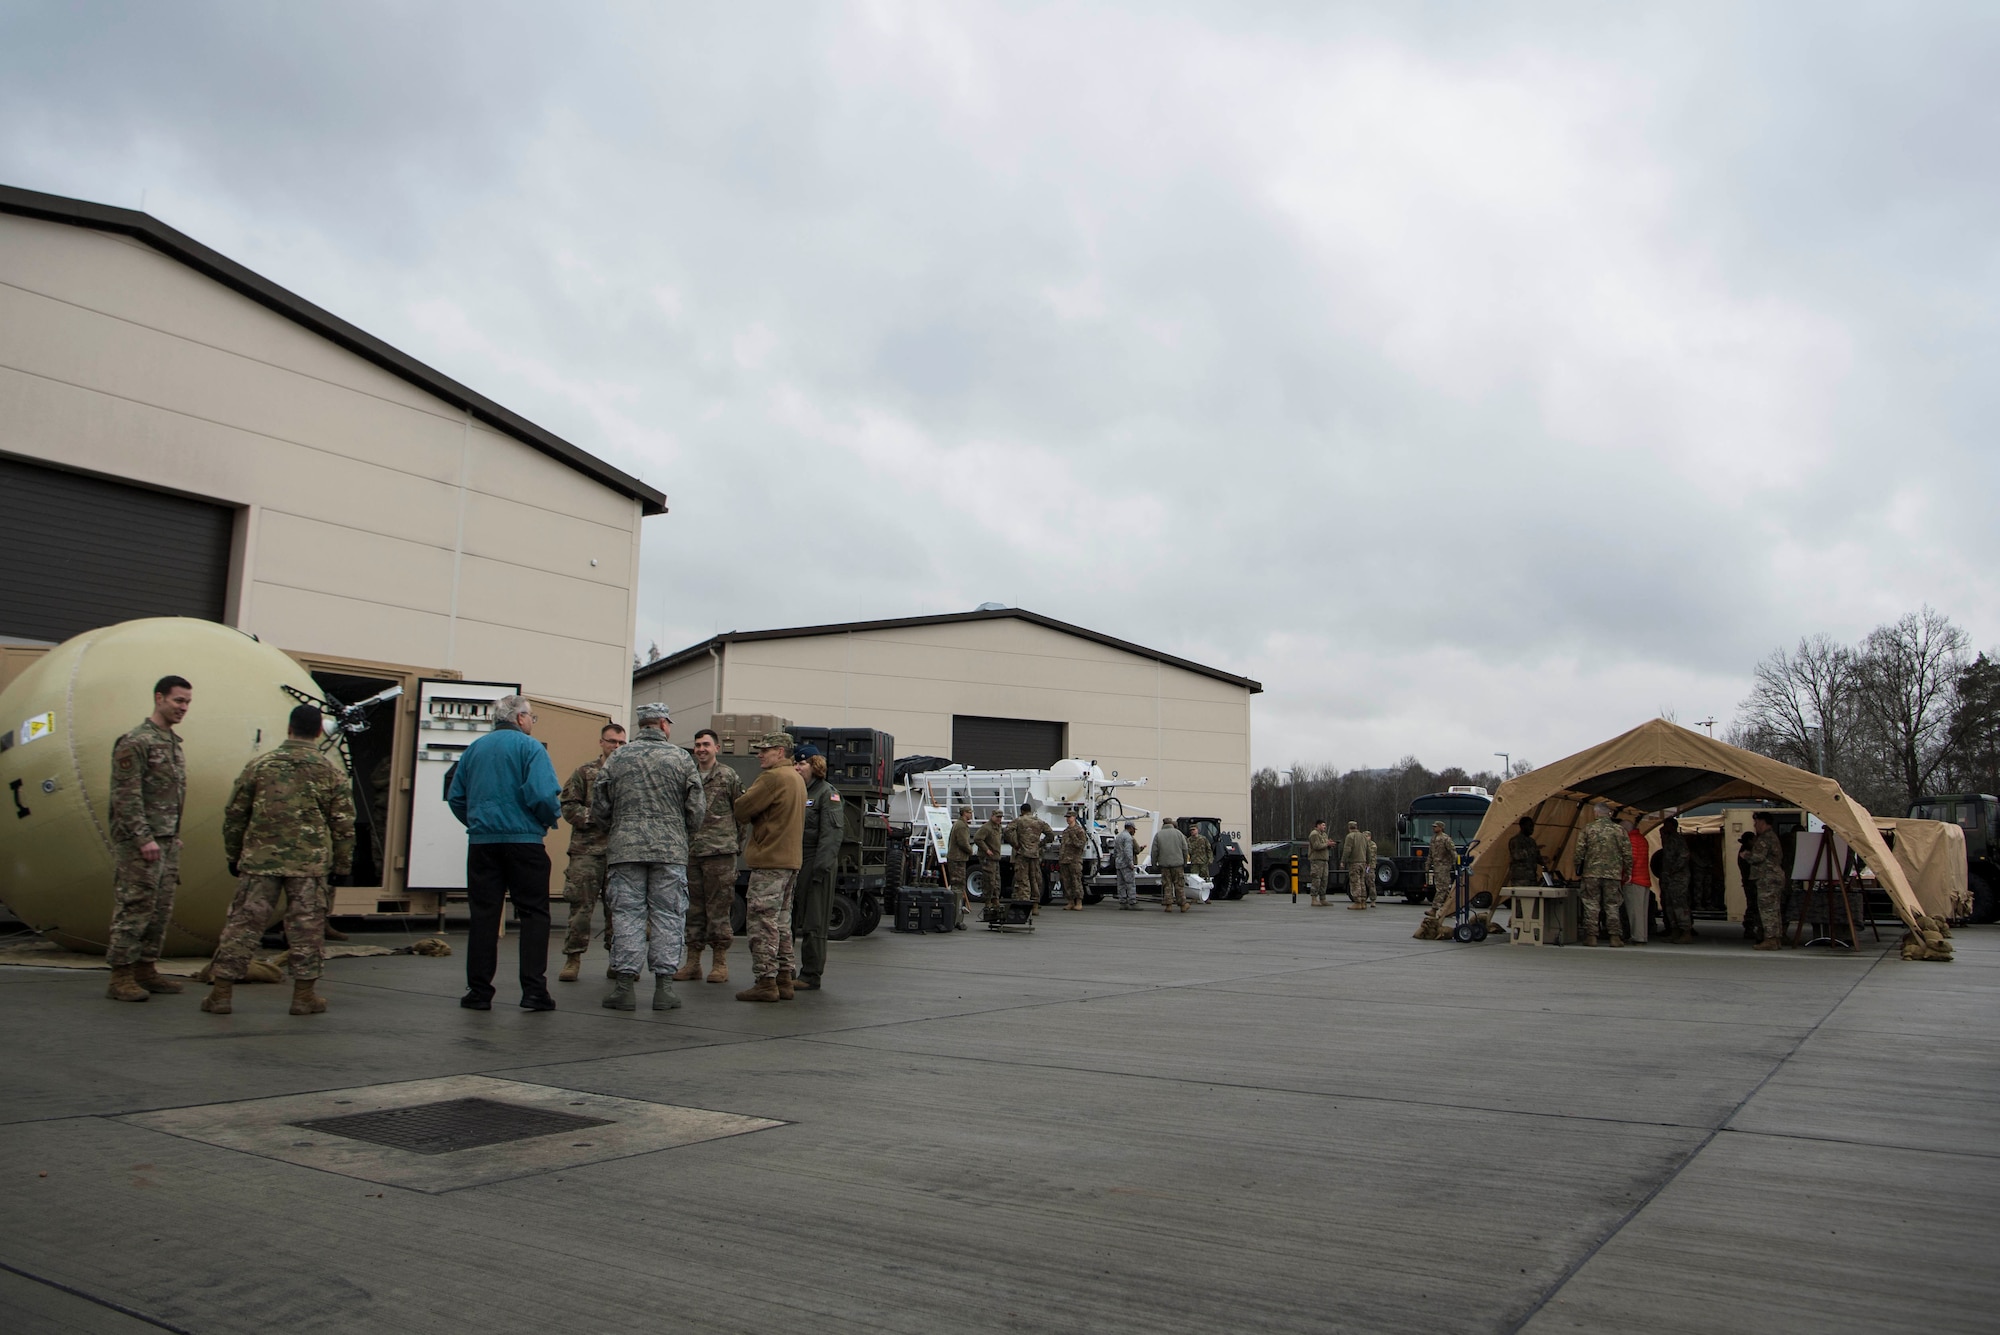 The 435th Contingency Response Group hosted a 20th anniversary training symposium for the Air Force’s contingency response mission.